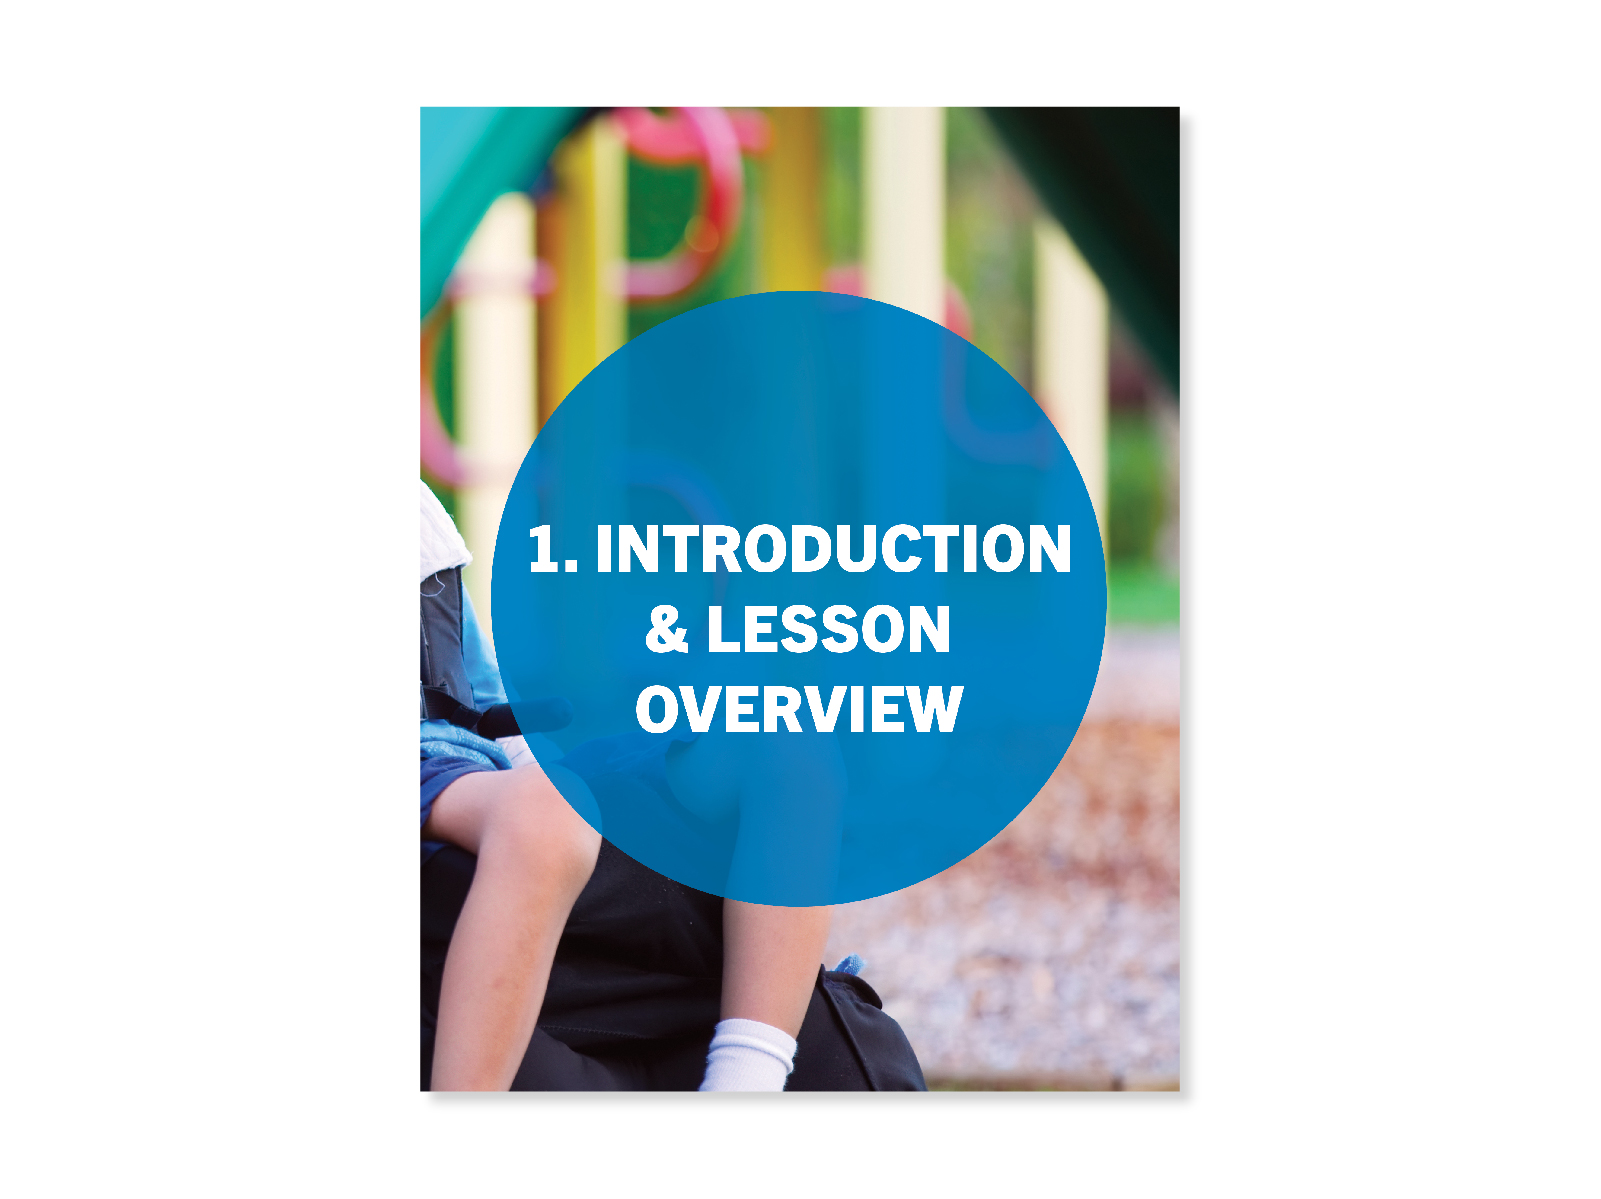 Blurred background fo an accessible play area with a child's legs and wheelchair bottom visible in the bottom left corner. Cover for "Difference Maker (K-8) Introduction & Lesson Overview".